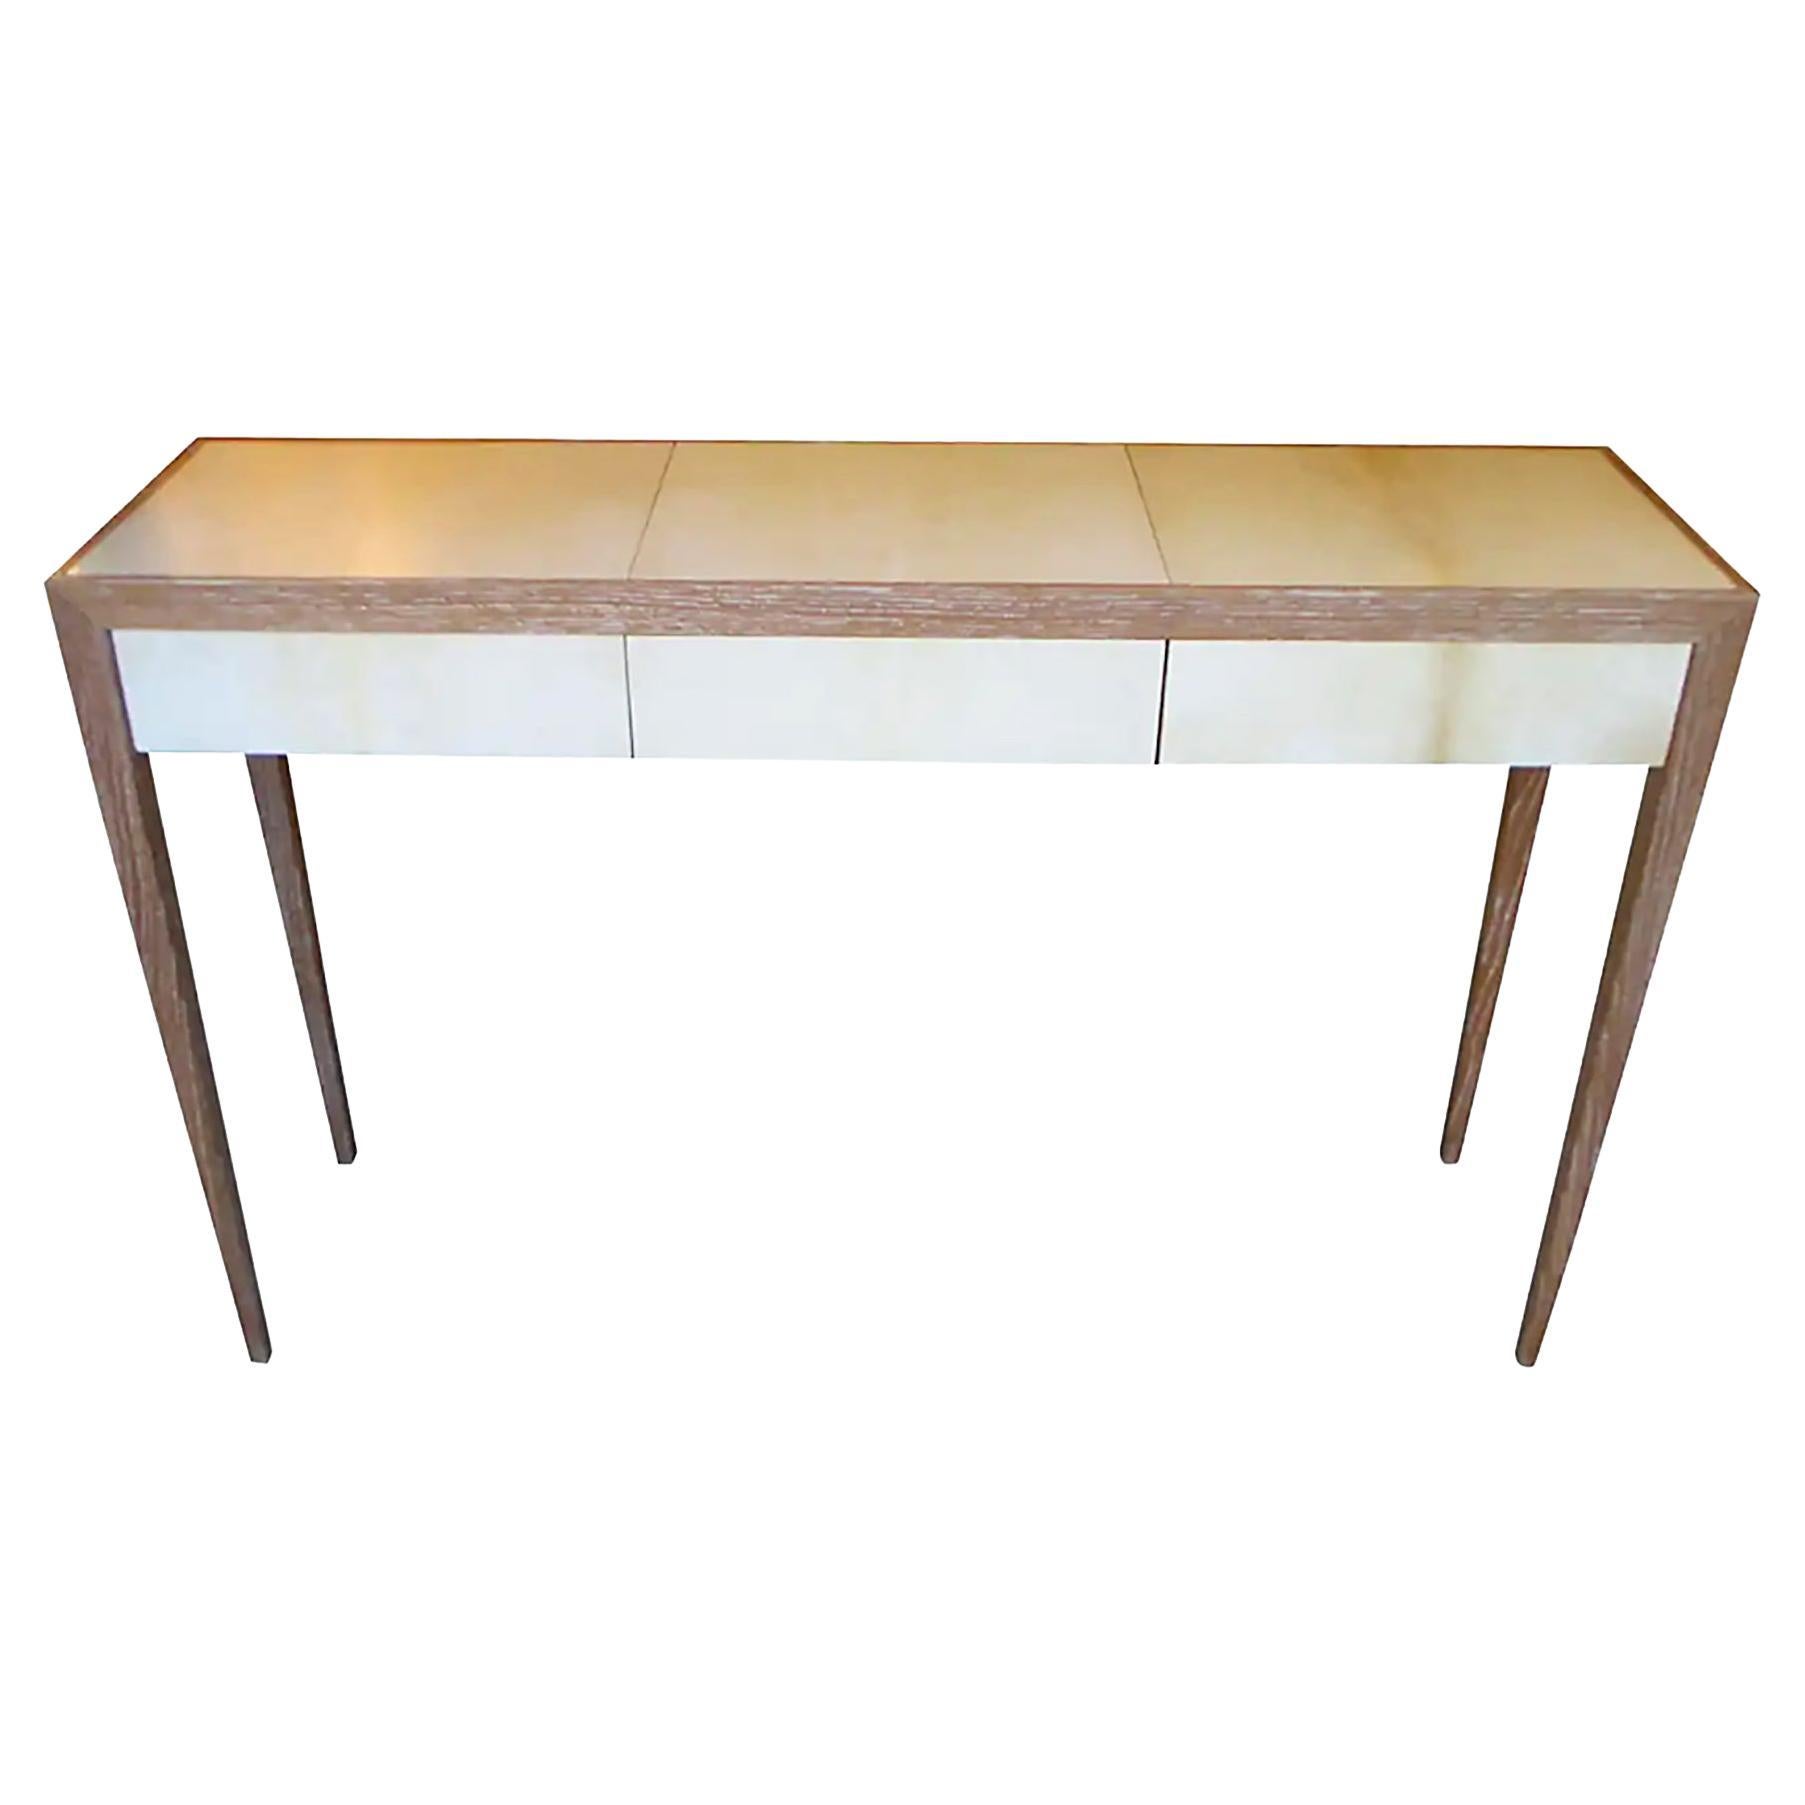 Custom Cerused Oak and Parchment Console Table